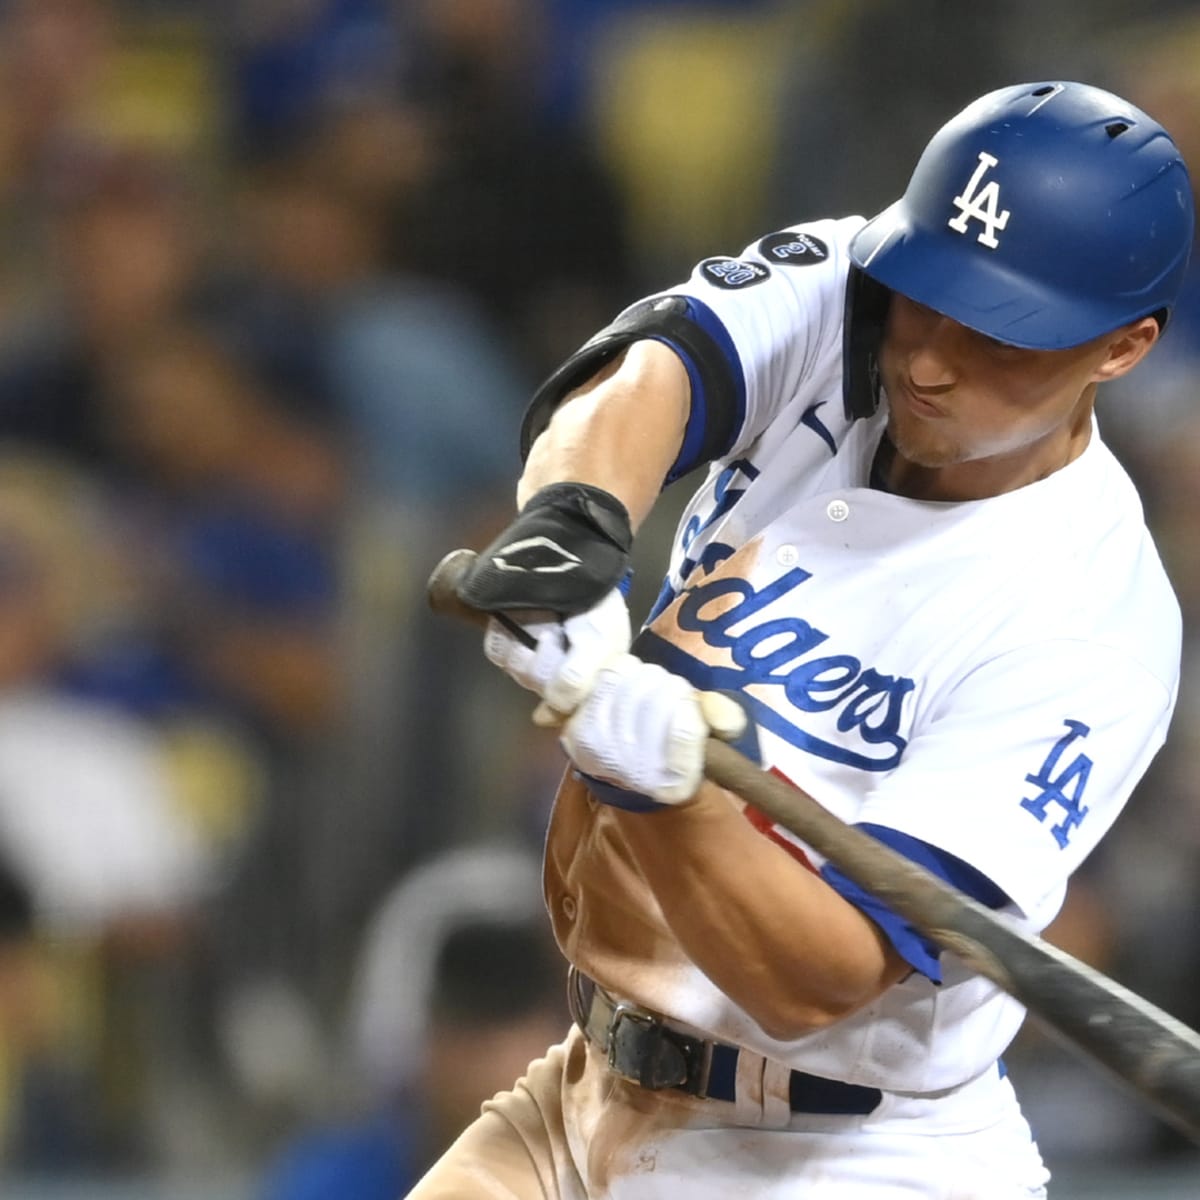 Texas Rangers may have interest in Corey Seager - True Blue LA